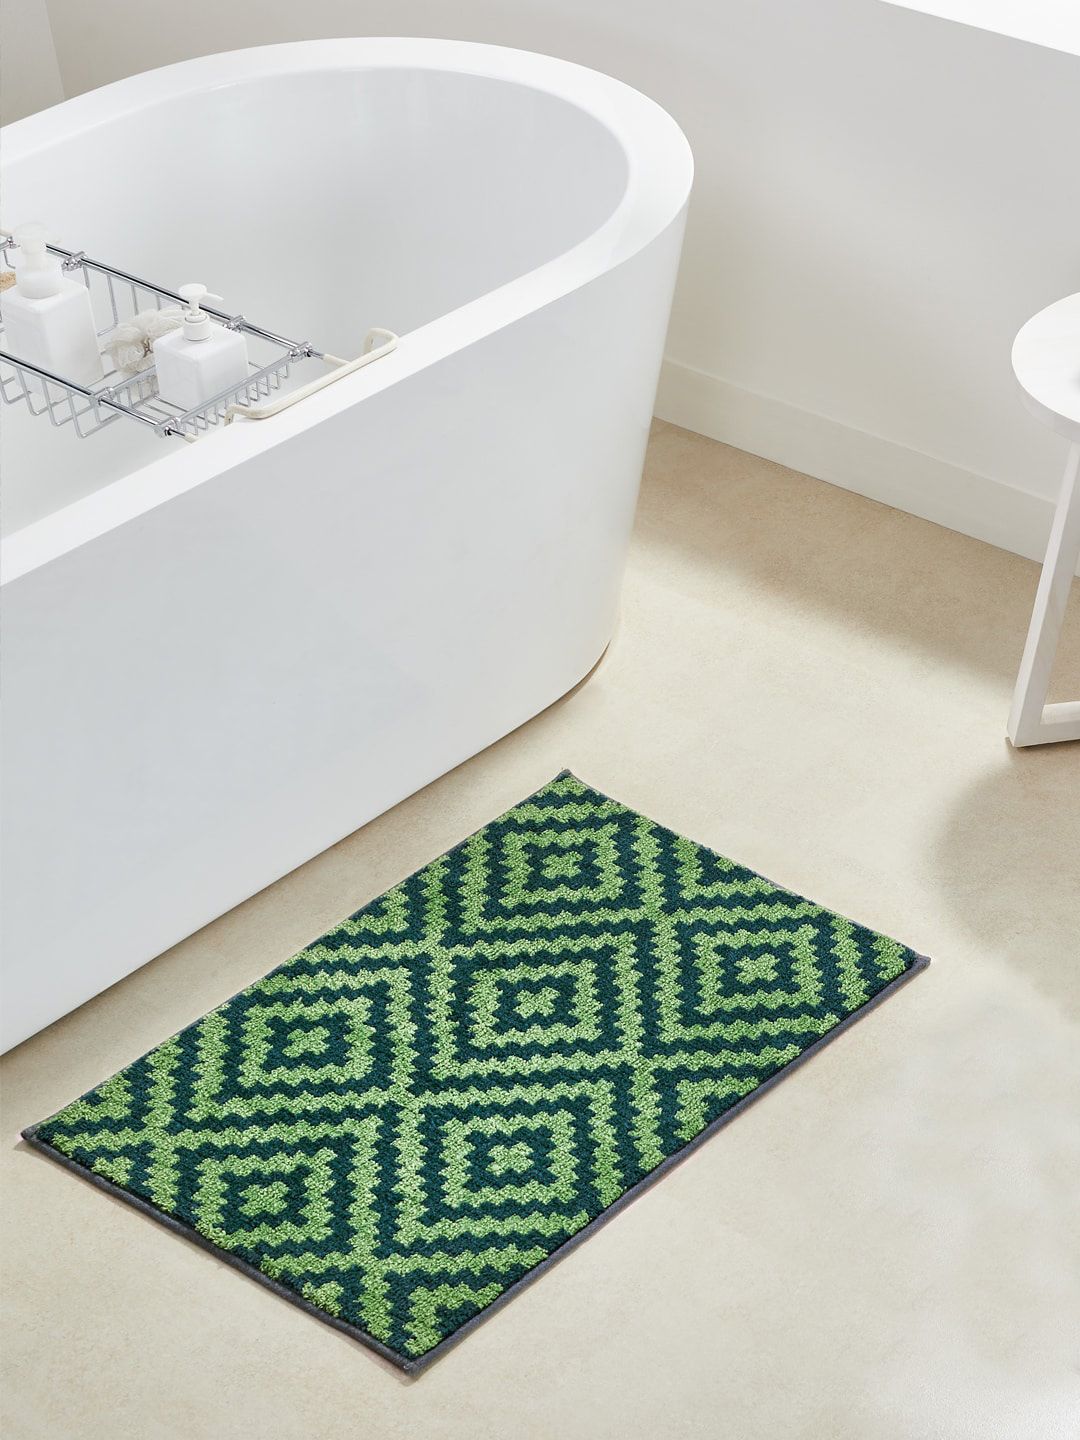 Pano Green Diamond Knitted 1902GSM Bath Rugs Price in India